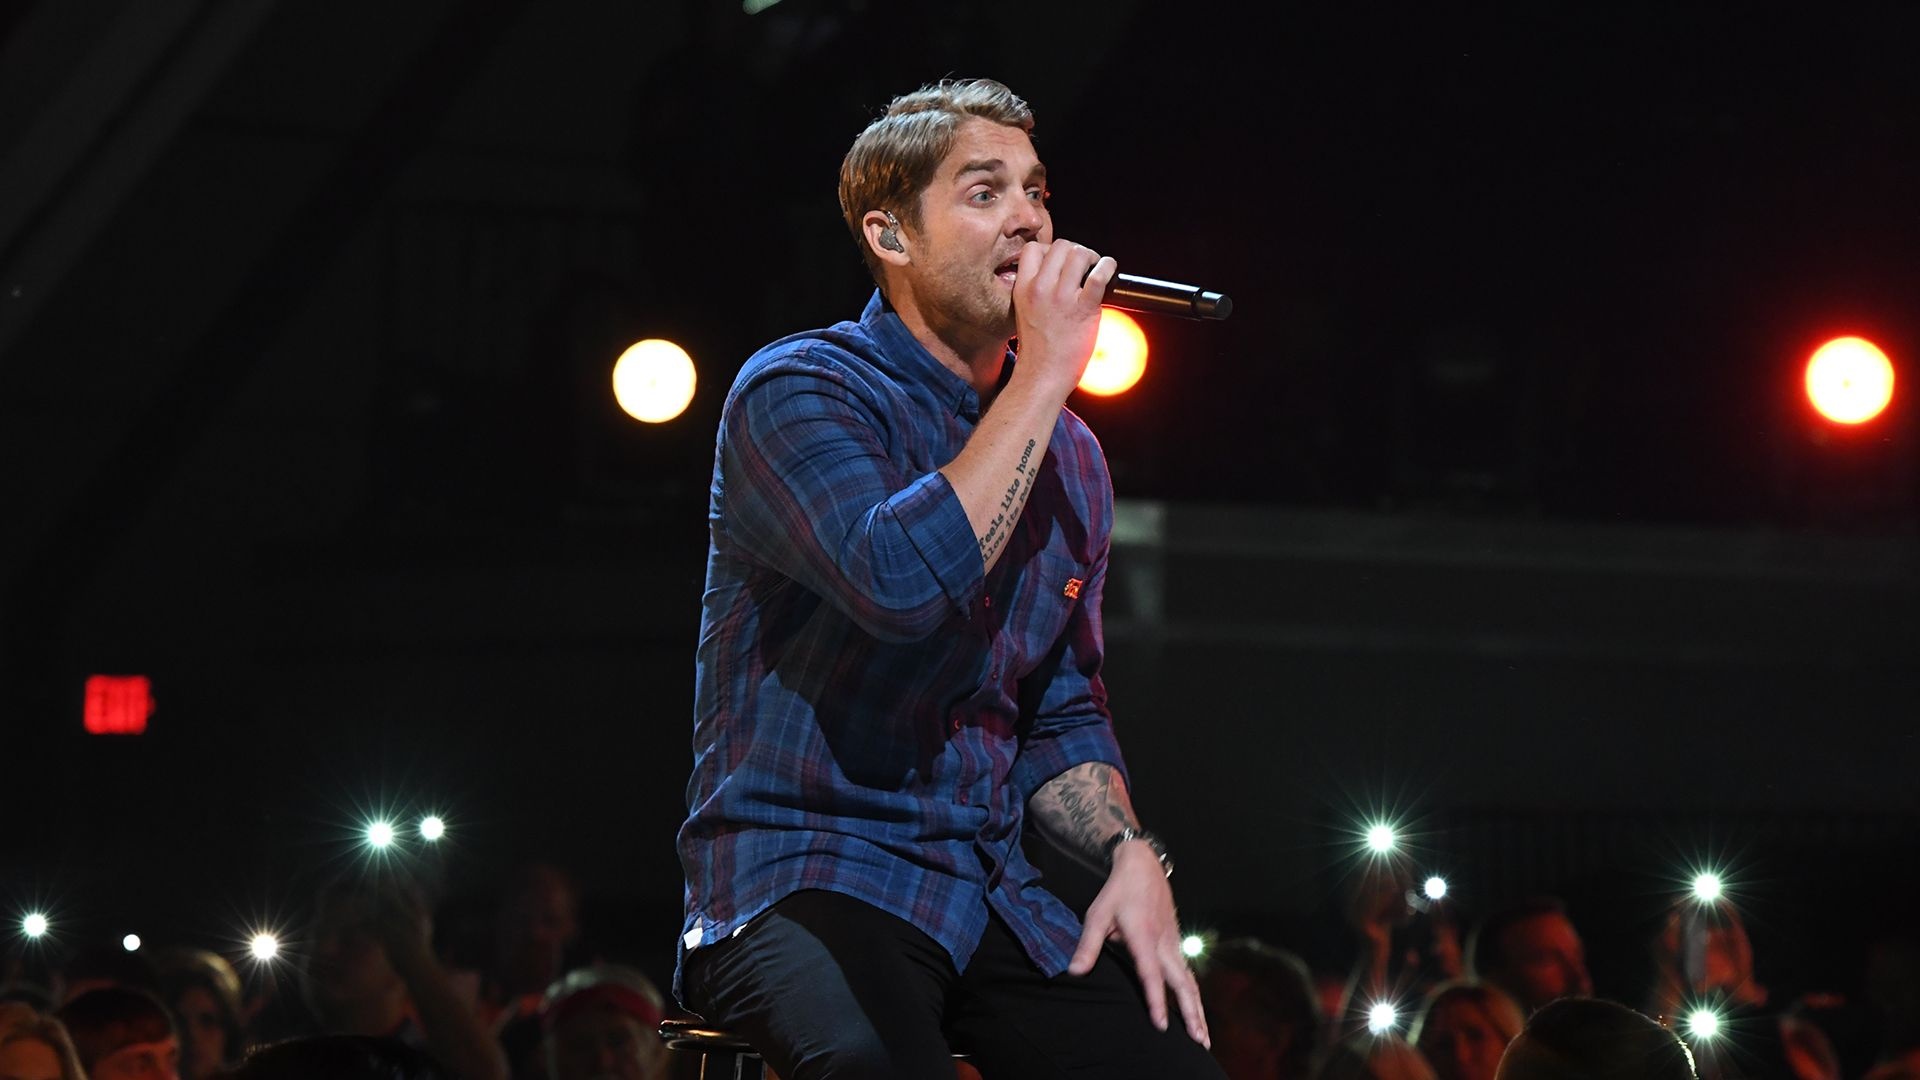 Brett Young, Musician, Country style, Concert performance, 1920x1080 Full HD Desktop